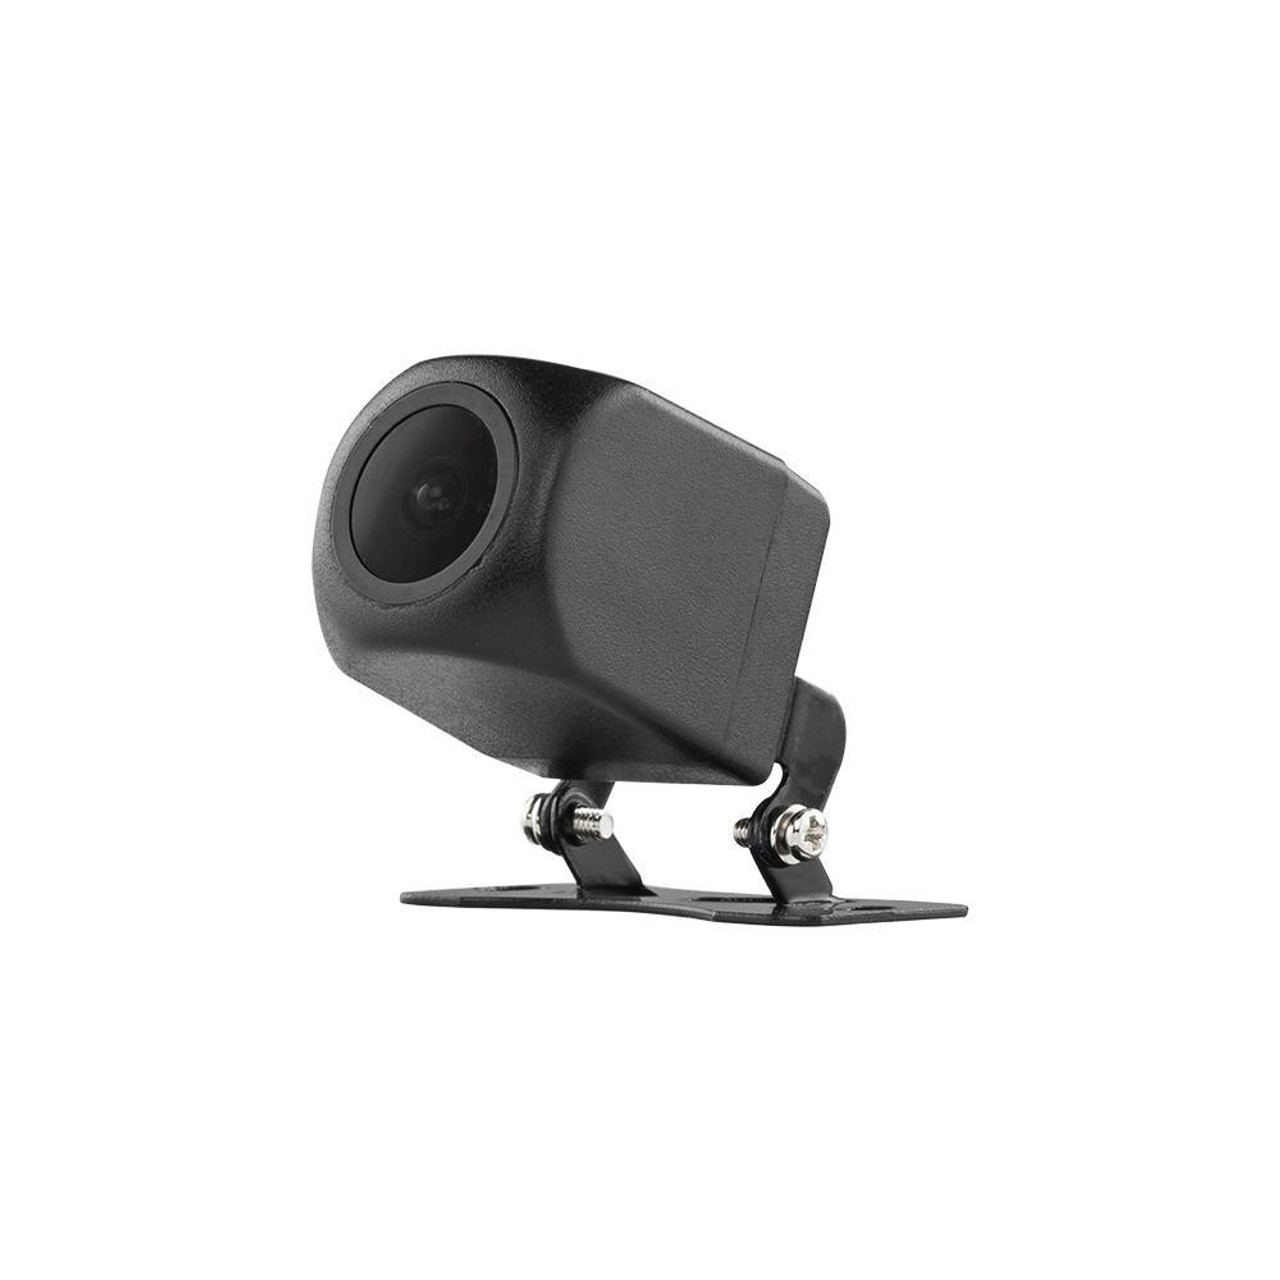 https://cdn11.bigcommerce.com/s-209k8v1/images/stencil/1280x1280/products/18938/38969/ds18-audio-ds18-bbx2-detachable-dvr-dash-cam-with-2.45-screen-front-and-rear-camera-1080hd-gps-and-wi-fiadas__51035.1658935816.jpg?c=2&imbypass=on